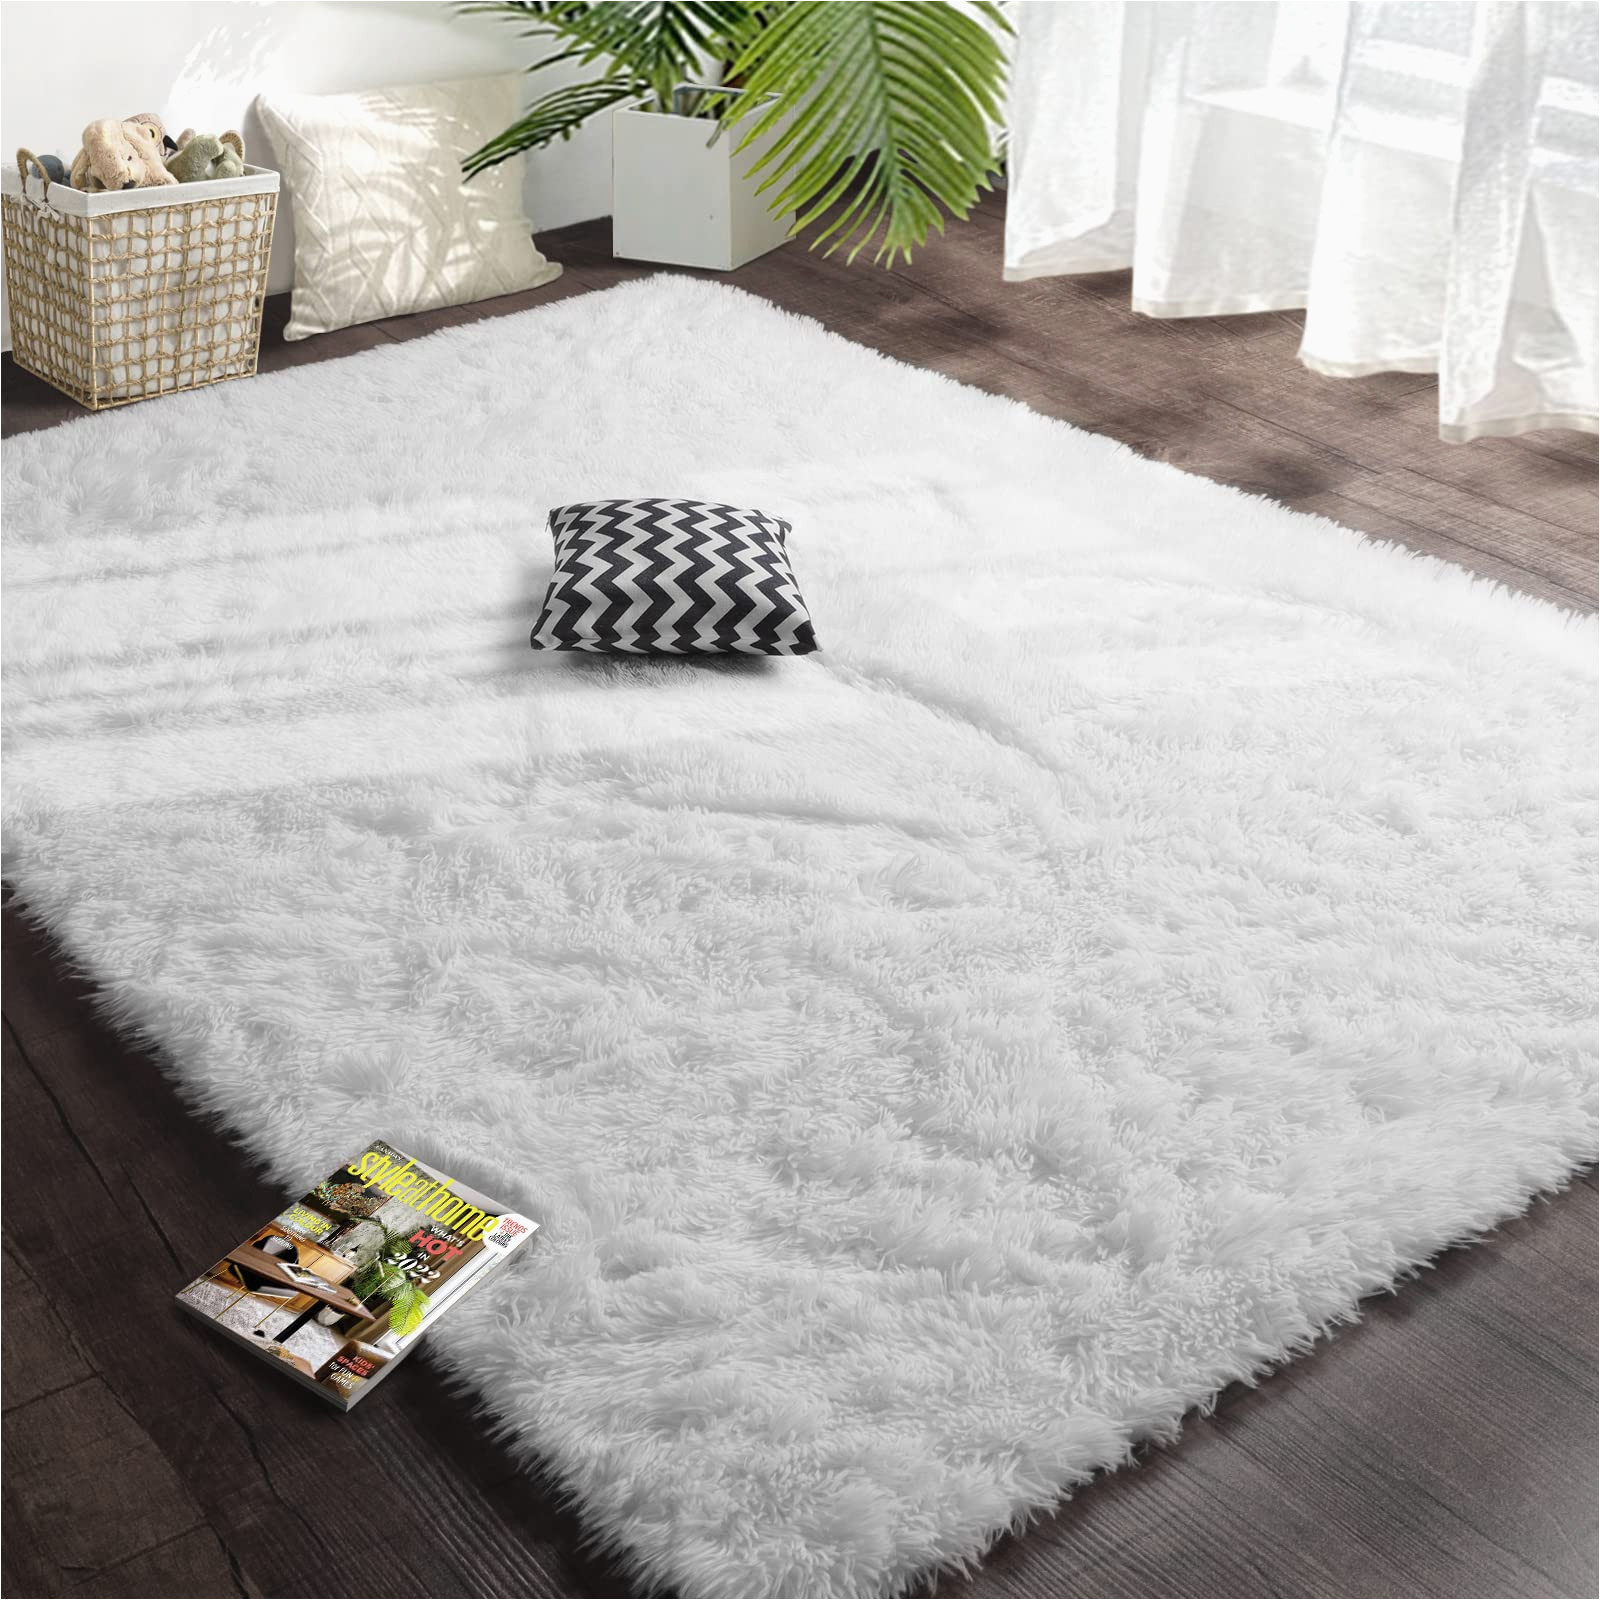 Super Cheap Large area Rugs Amangel White Super soft Rugs for Living Room, 5′ X 7′, Fluffy area Rug for Bedroom, Large Shaggy Plush Rugs for Kids Girls Boys Room, Non-slip Fuzzy …